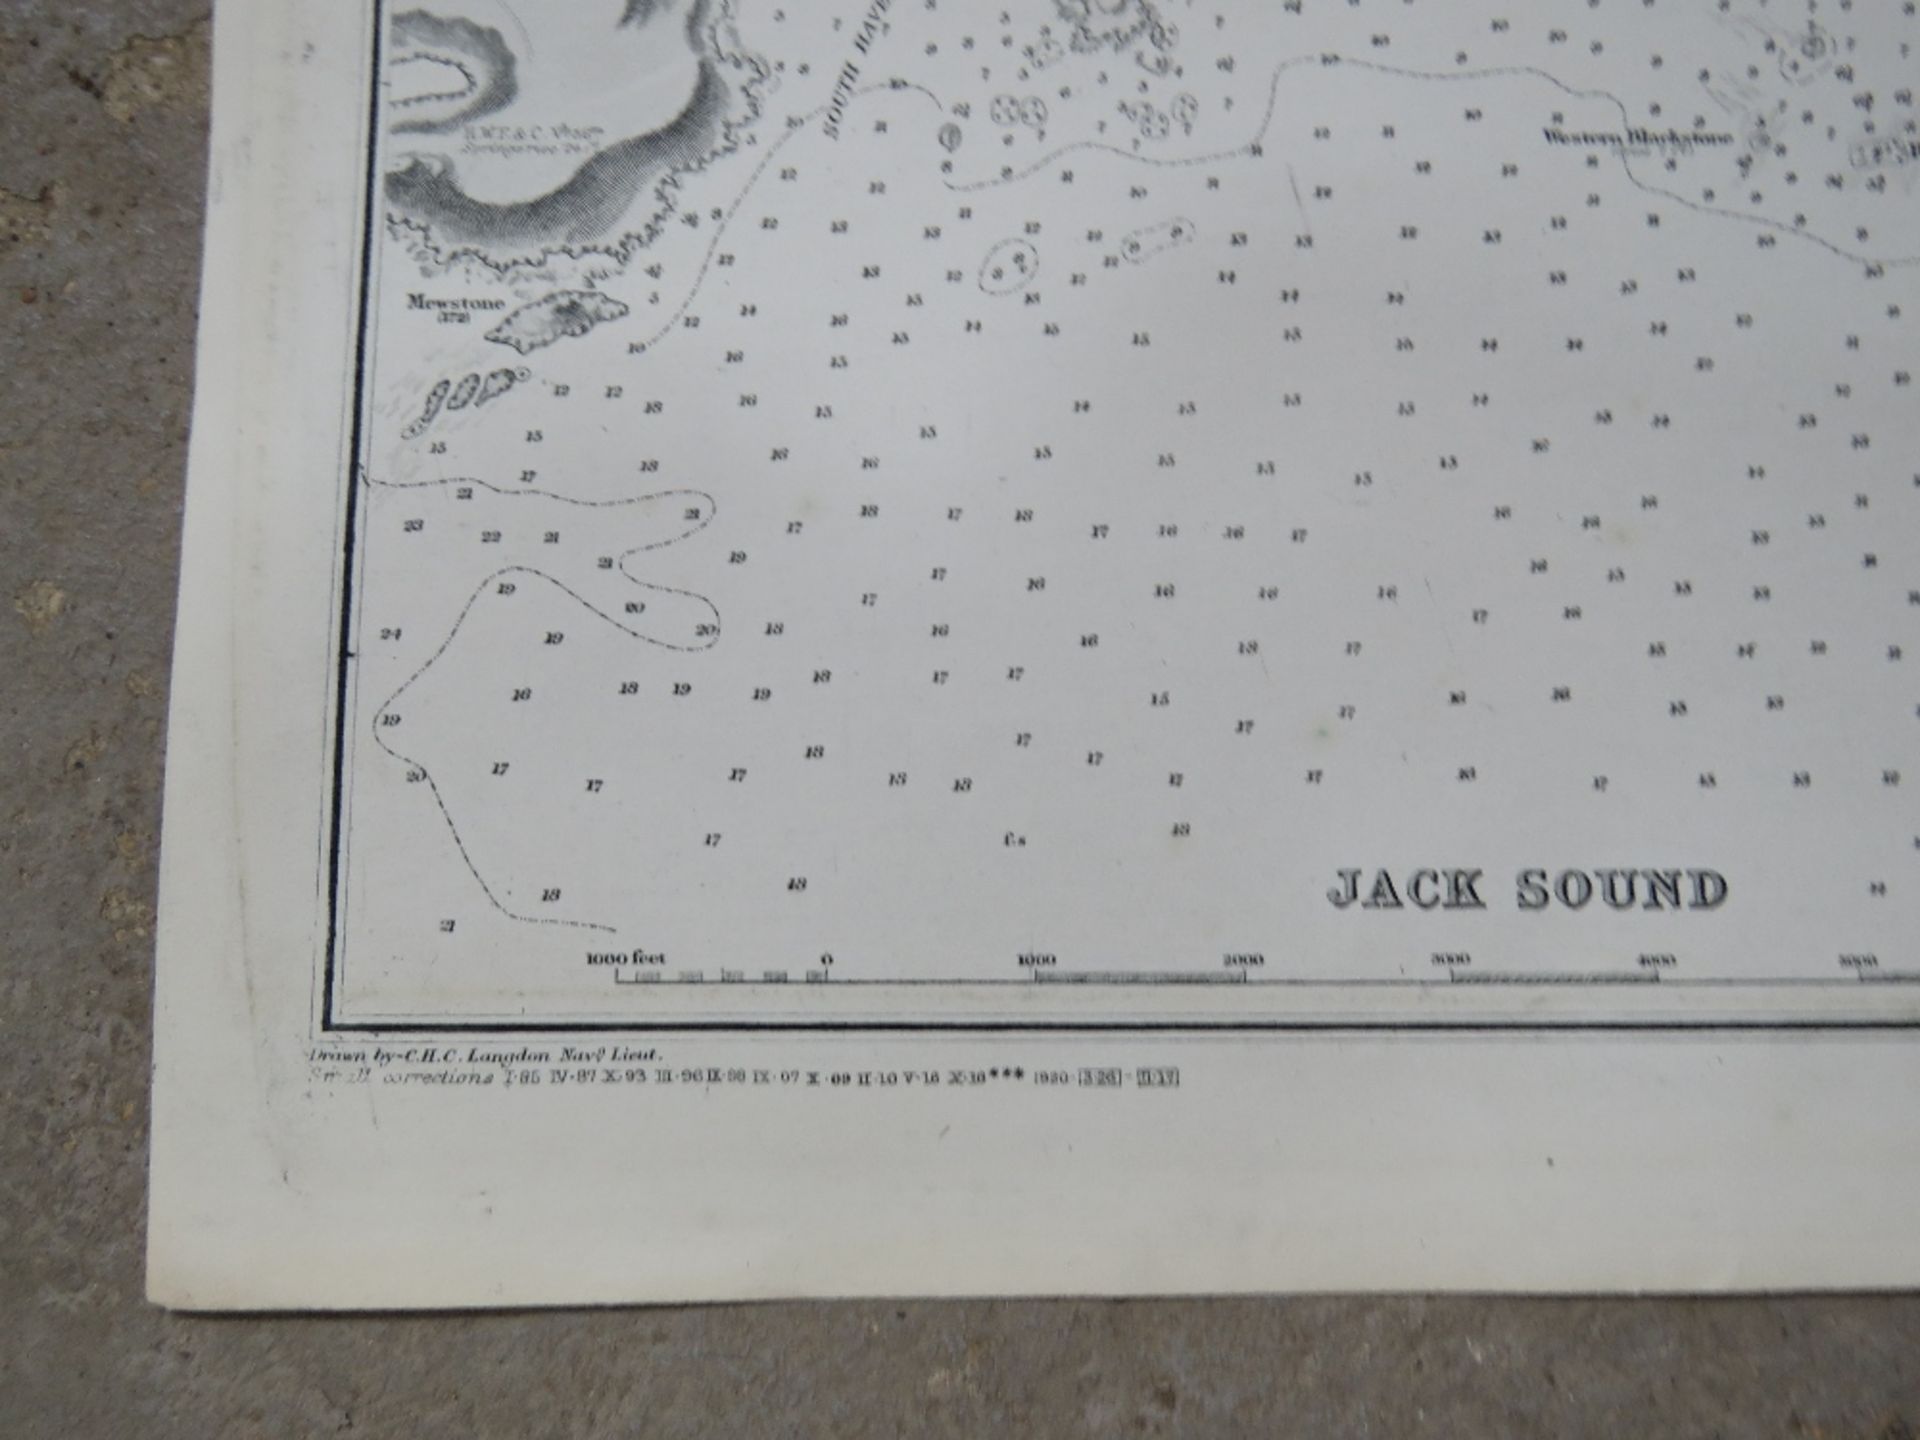 A Naval chart of St Anns Head to St Brides Bay surveyed by Commanders Sherringham and Alldridge, - Image 4 of 4